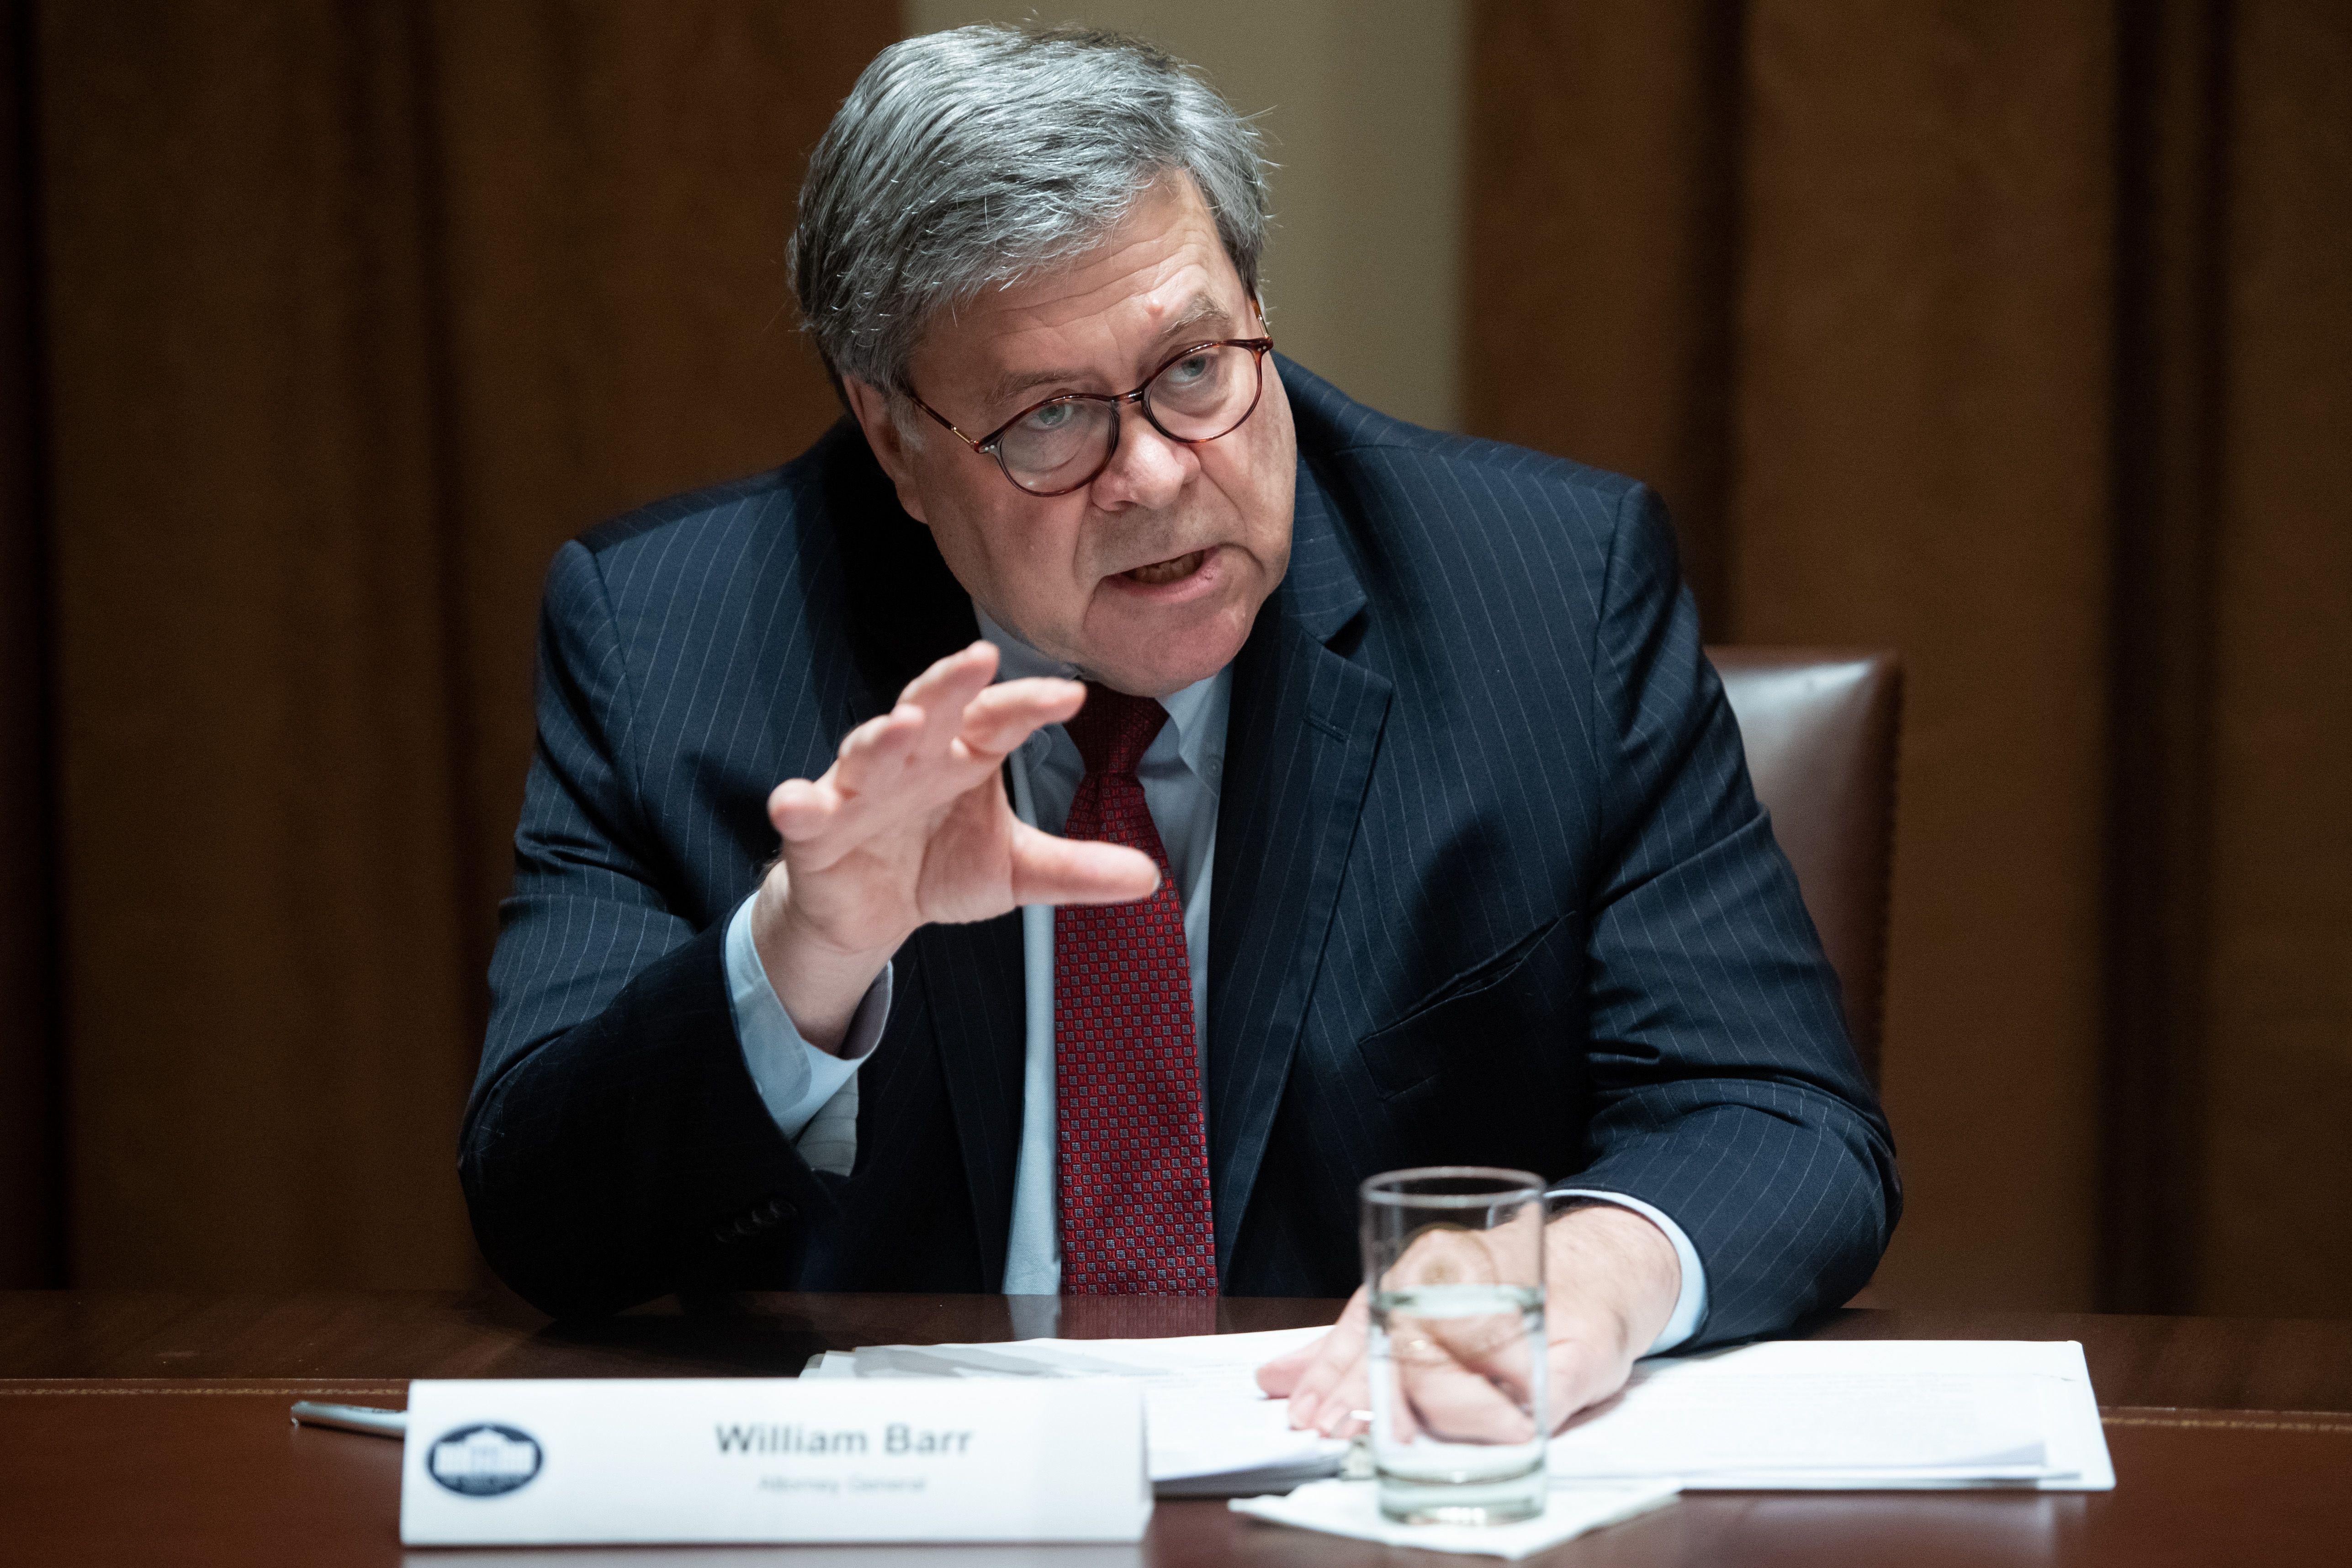 William Barr, sitting at a desk with a glass of water and some papers, raises his hand while speaking.